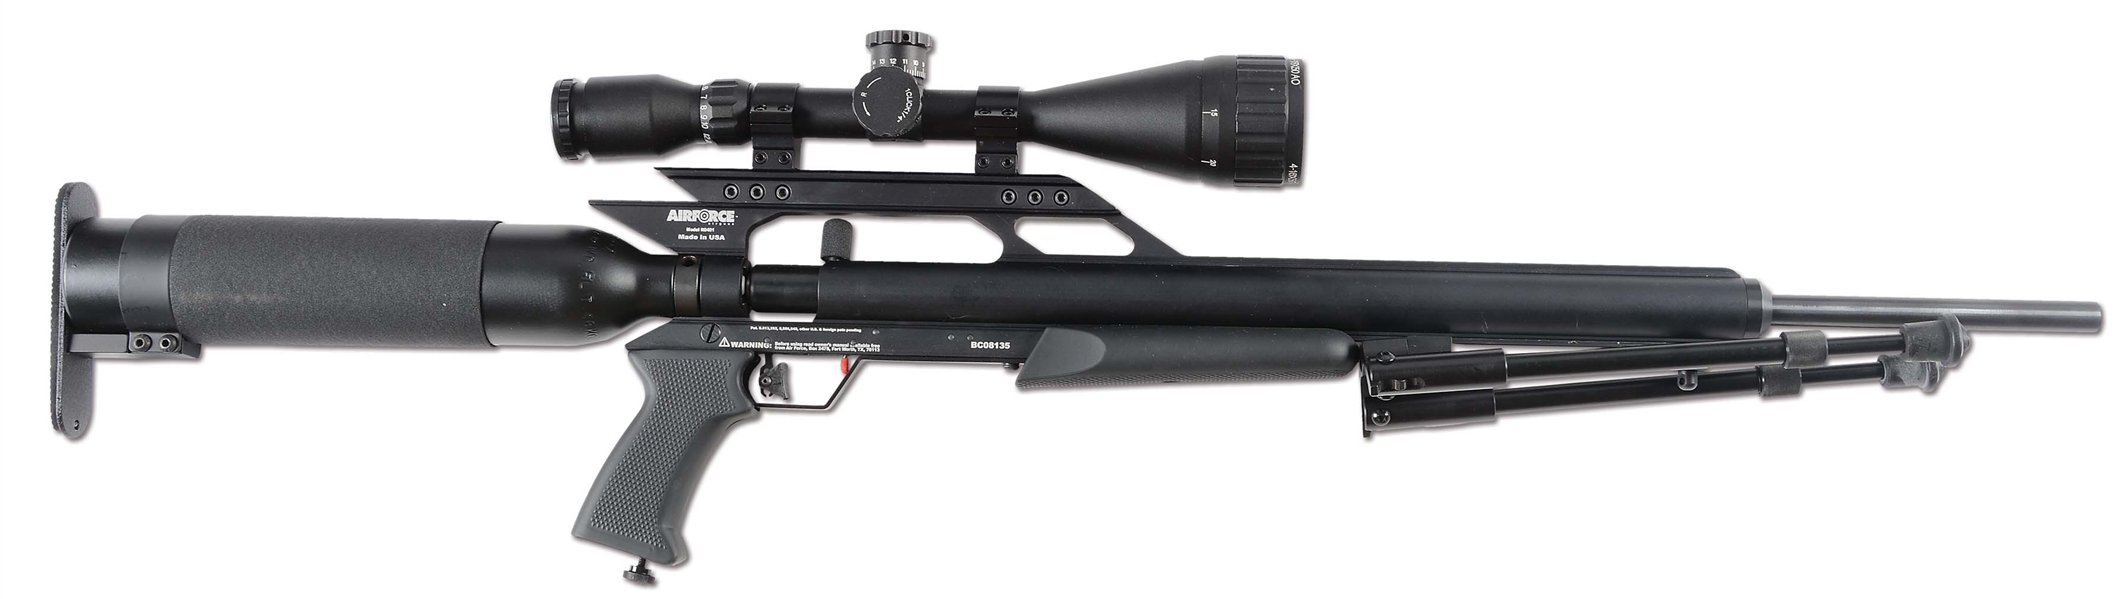 AIRFORCE ULTIMATE CONDOR COMBO AIR RIFLE